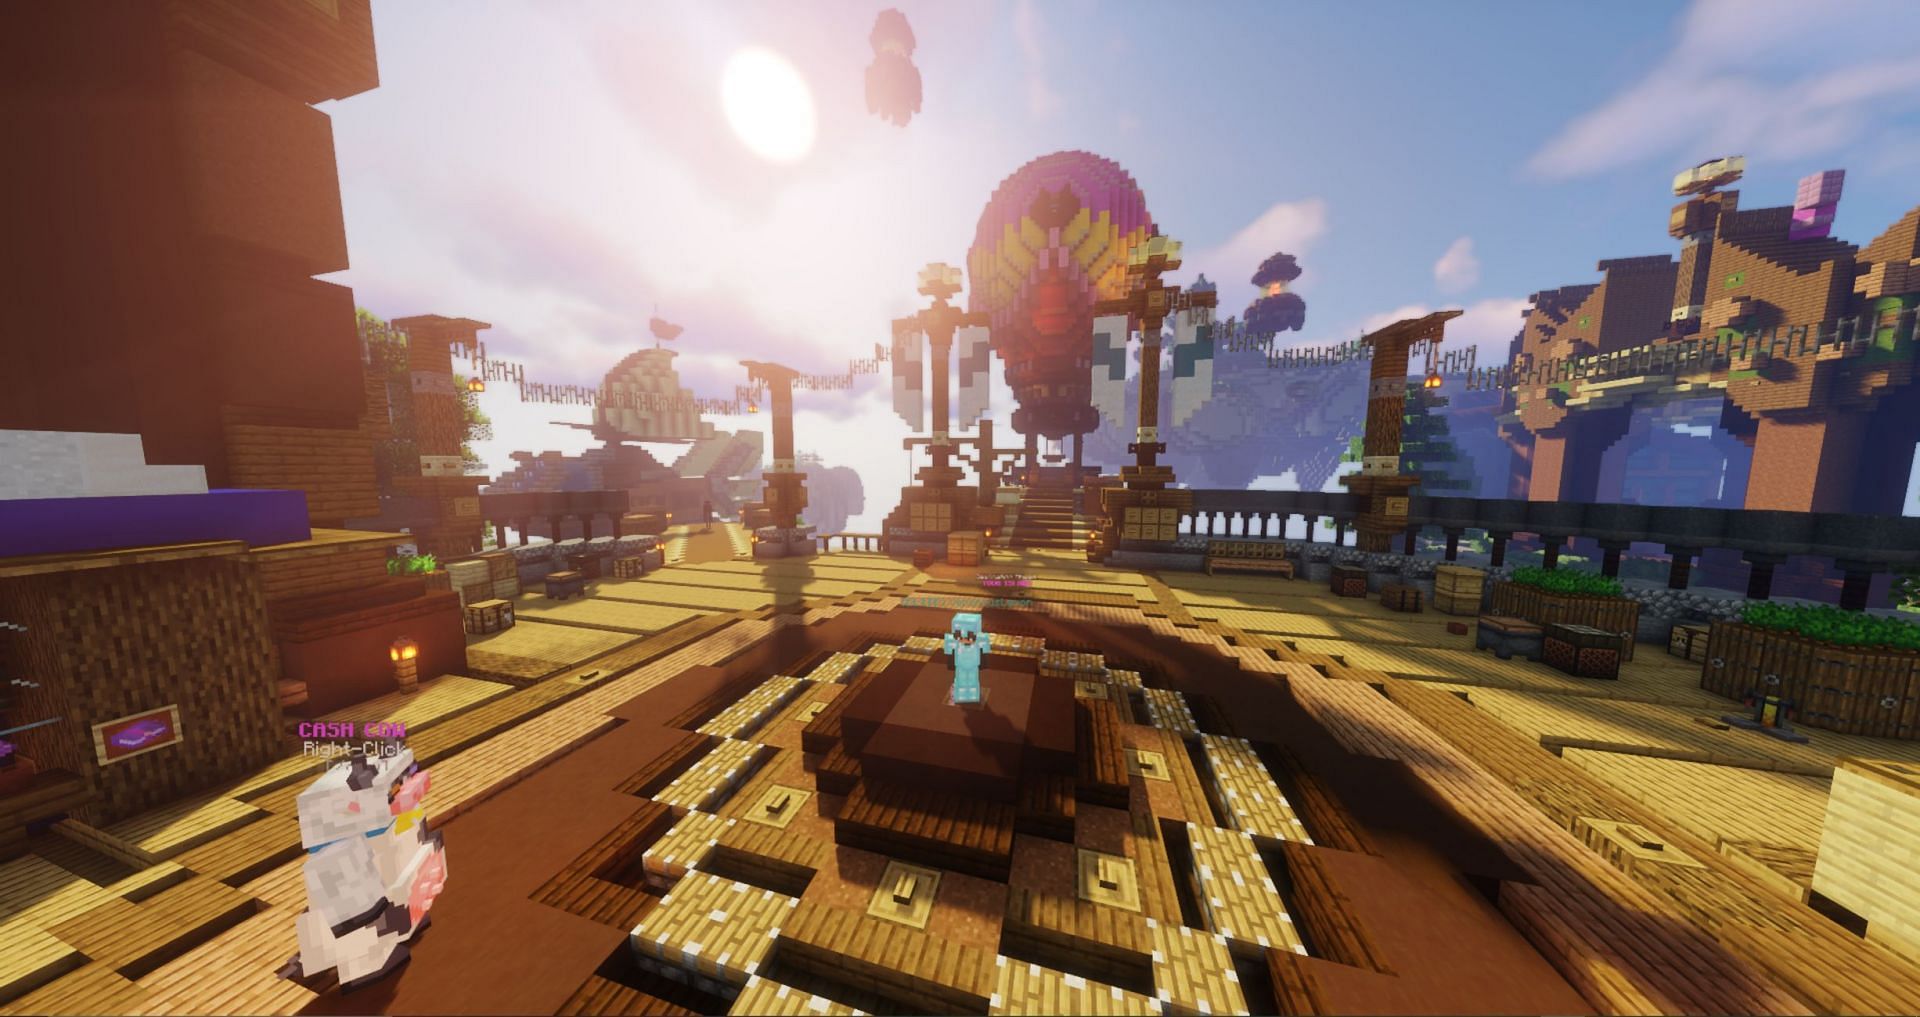 Manacube is a top server for many game modes, including Skyblock (Image via Manacube Wiki)